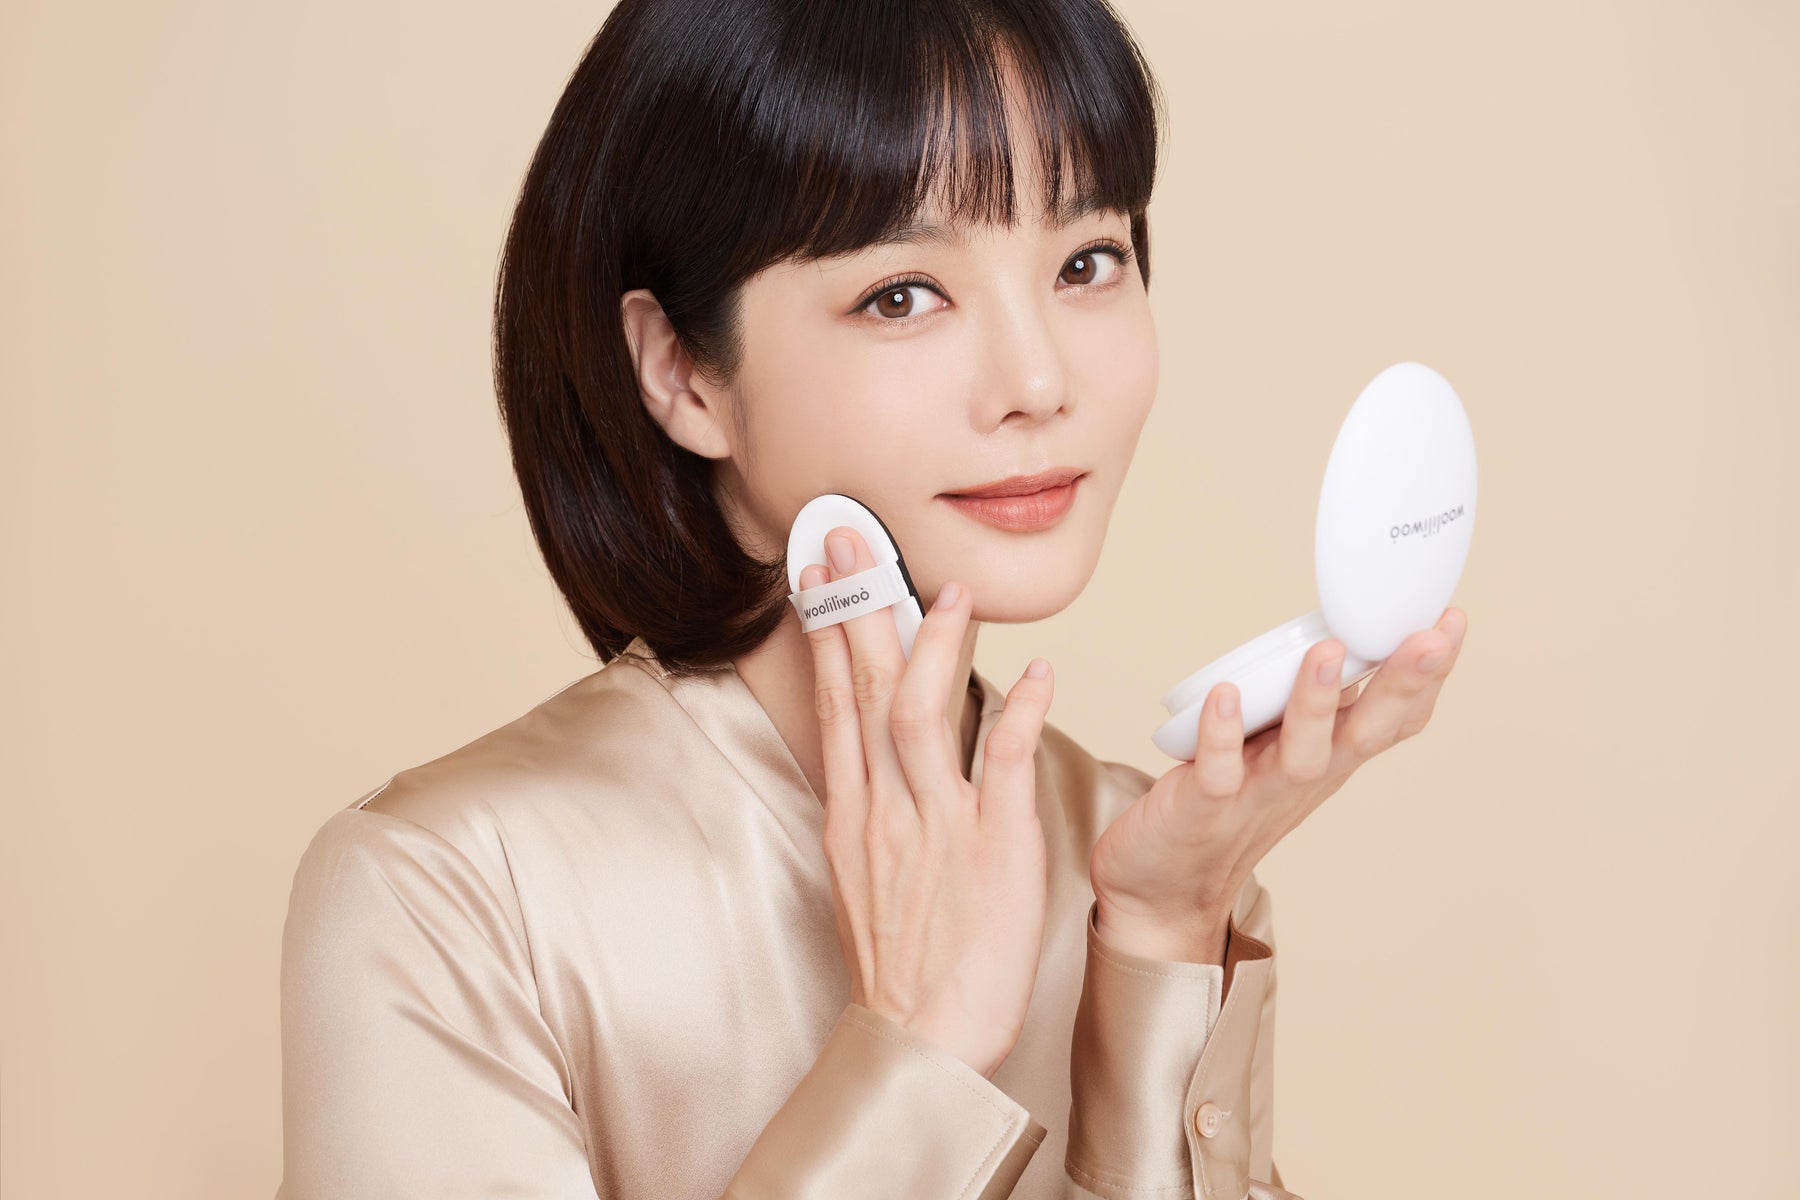 Shop Korean Skin care and Makeup brand Wooliliwoo at Luxiface.com